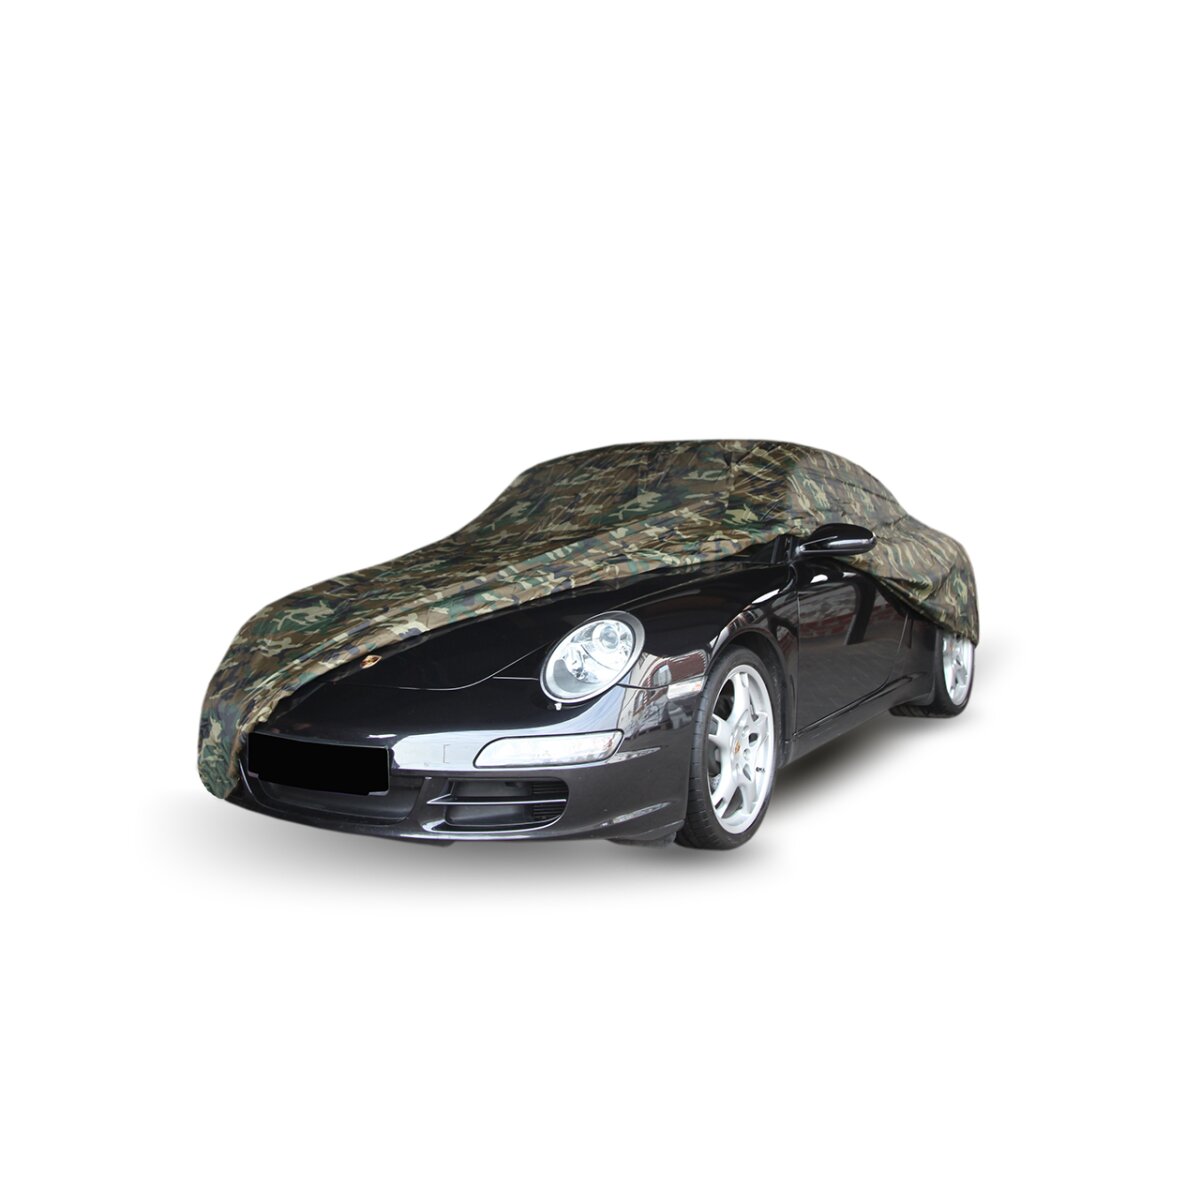 https://www.autoabdeckung.com/media/image/product/11592/lg/autoabdeckung-car-cover-camouflage-fuer-audi-a5-coupe-8t.jpg